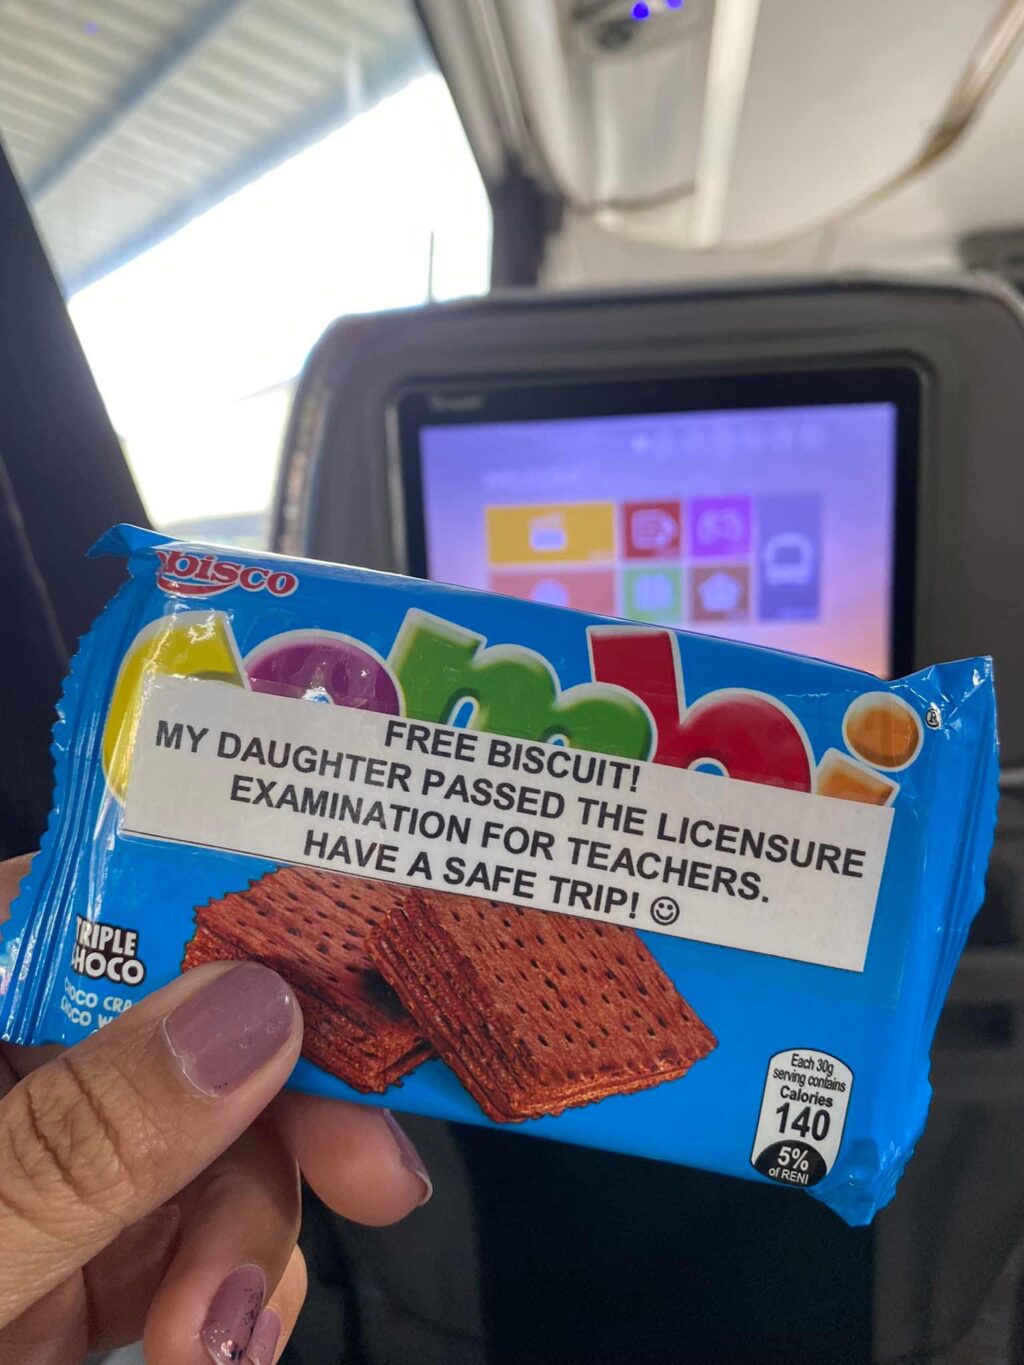  Bus driver hands out free biscuits to celebrate his daughter’s achievement. In photo is The biscuit Hanna Dayap received from the Bus Driver,